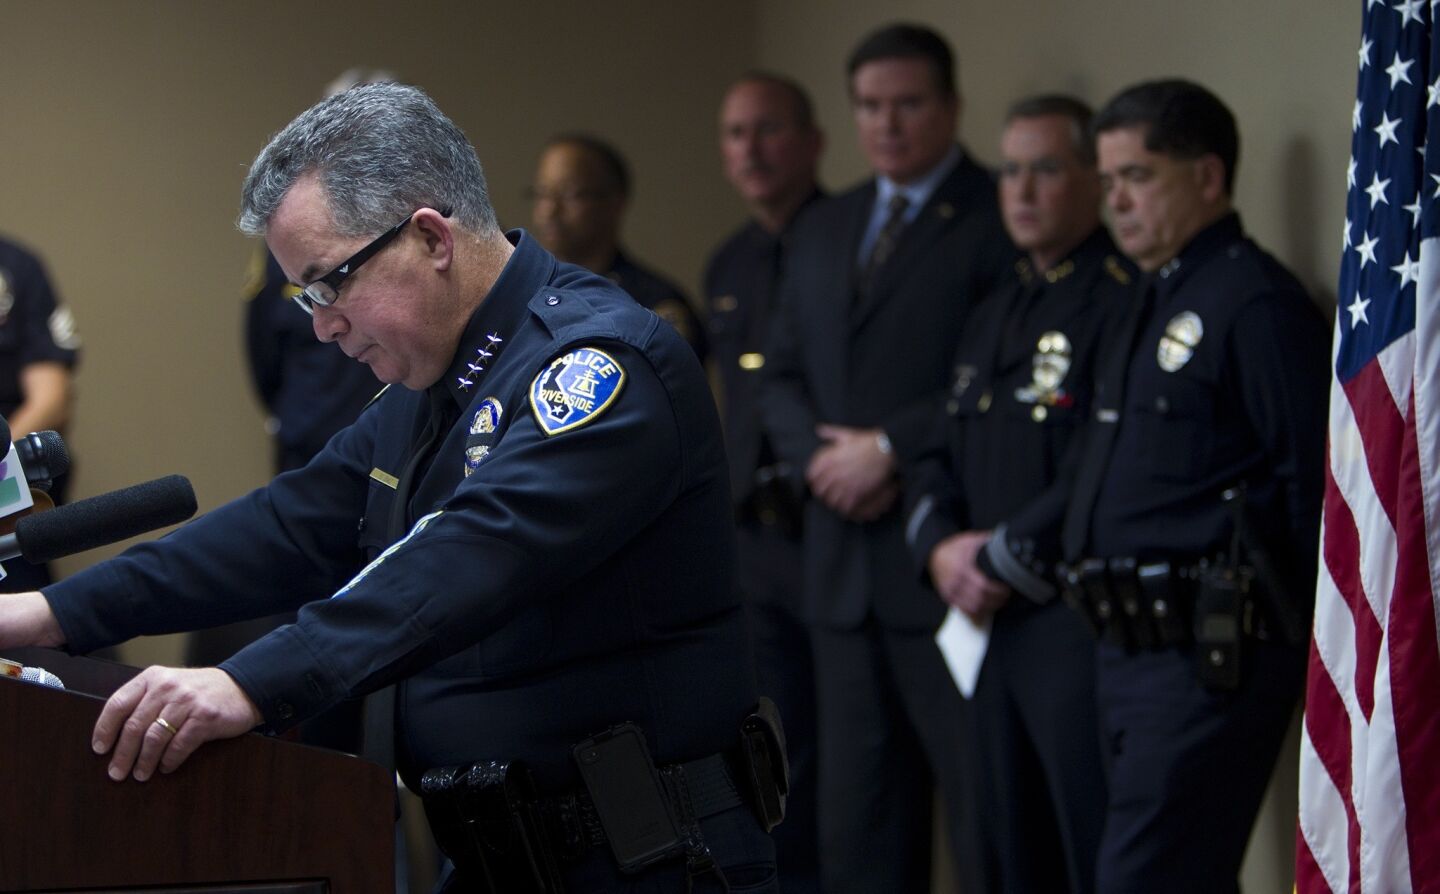 Riverside Police Chief Sergio Diaz looks down as he announces that the 34-year-old officer killed in the early morning shooting was an 11-year veteran of the department during a press conference at the Magnolia Facility of the Riverside Police Department. Two officers were shot at the corner of Magnolia and Arlington avenues. The officers were sitting at a red light when they were ambushed. One was killed, the other was still in surgery Thursday morning. The alleged shooter is fired LAPD officer Christopher Jordan Dorner,33.